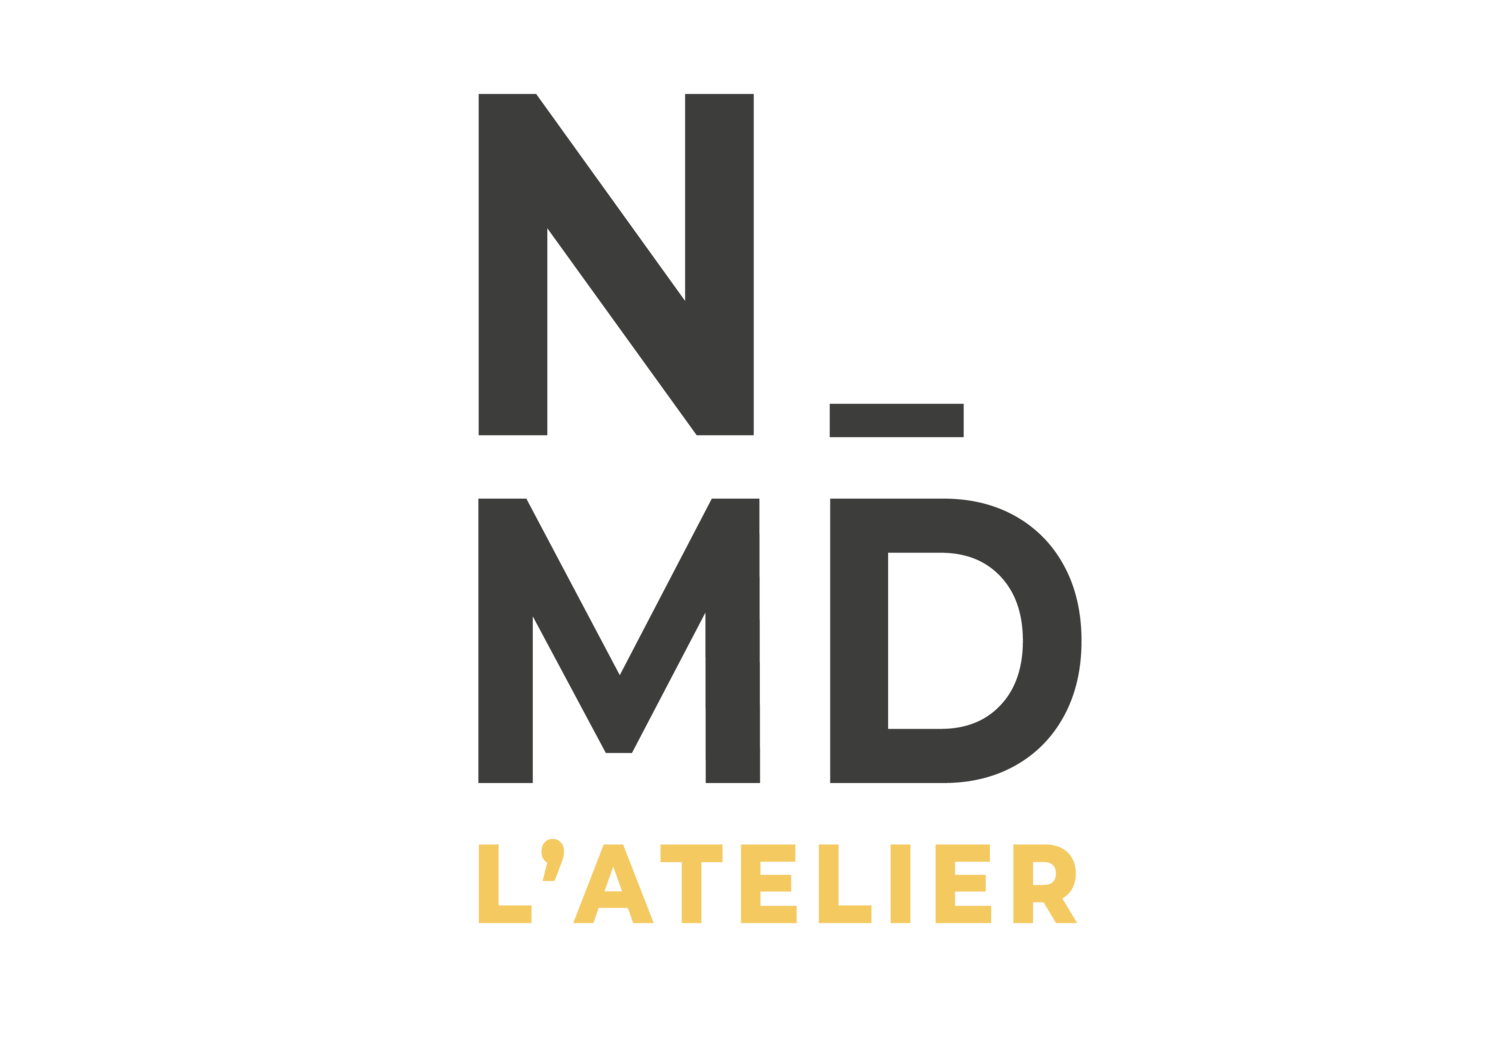 NMD lAtelier